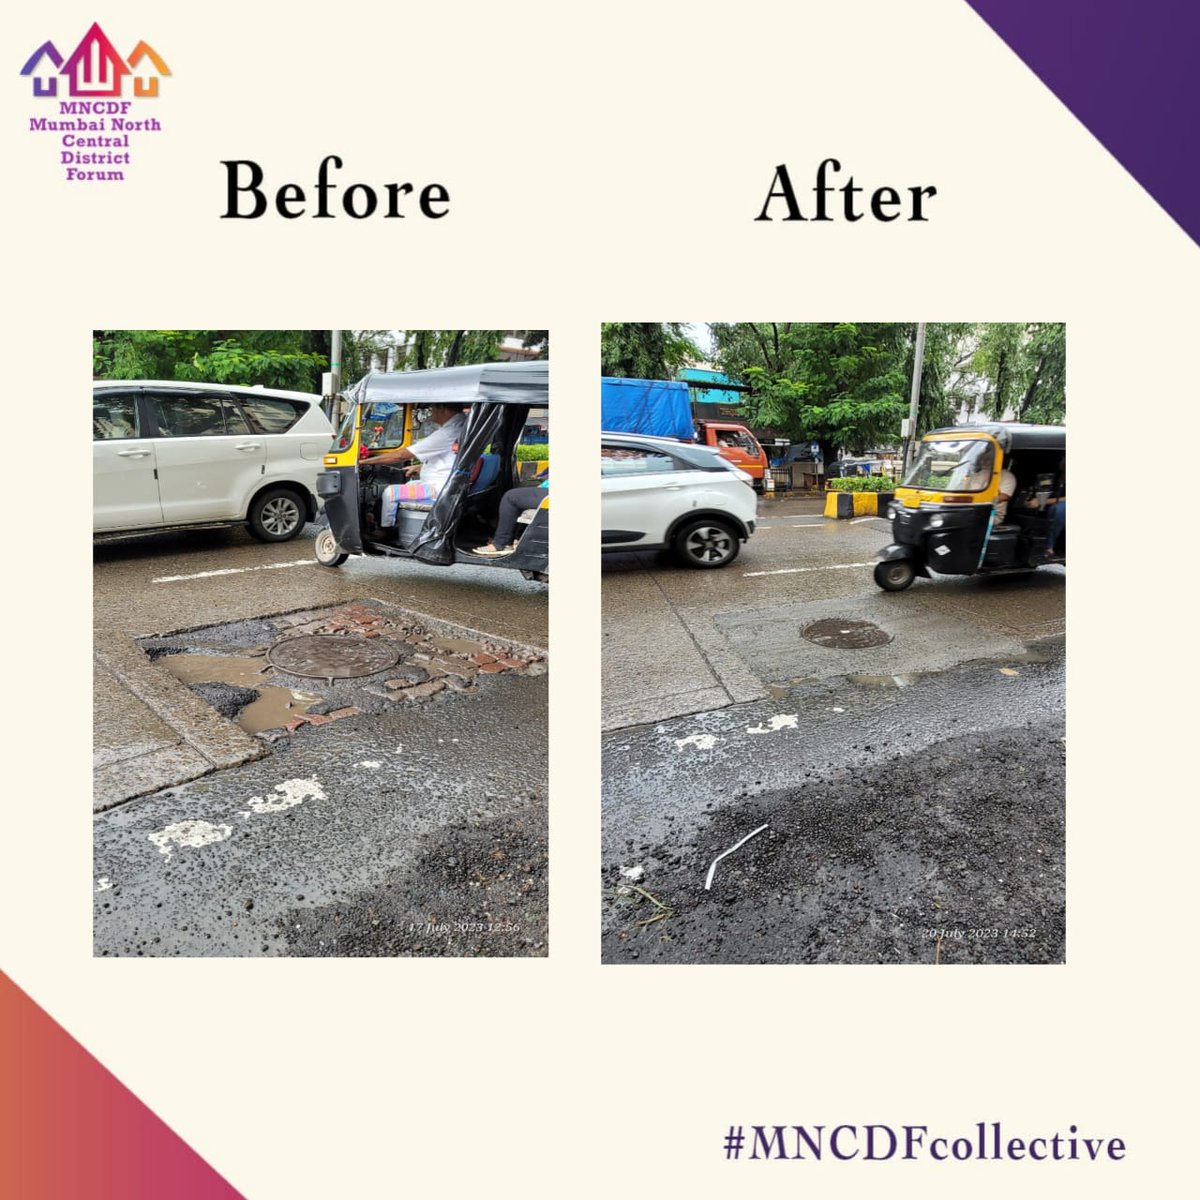 Civic grievance regarding Crater at Marve Road, near Aspee Auditorium, Malad (W), was attended & repaired by @mybmc , after #MNCDFcollective member @AlertCitizen5 submitted an official complaint & followed up on it. We welcome the efforts of our team towards Community Governence.